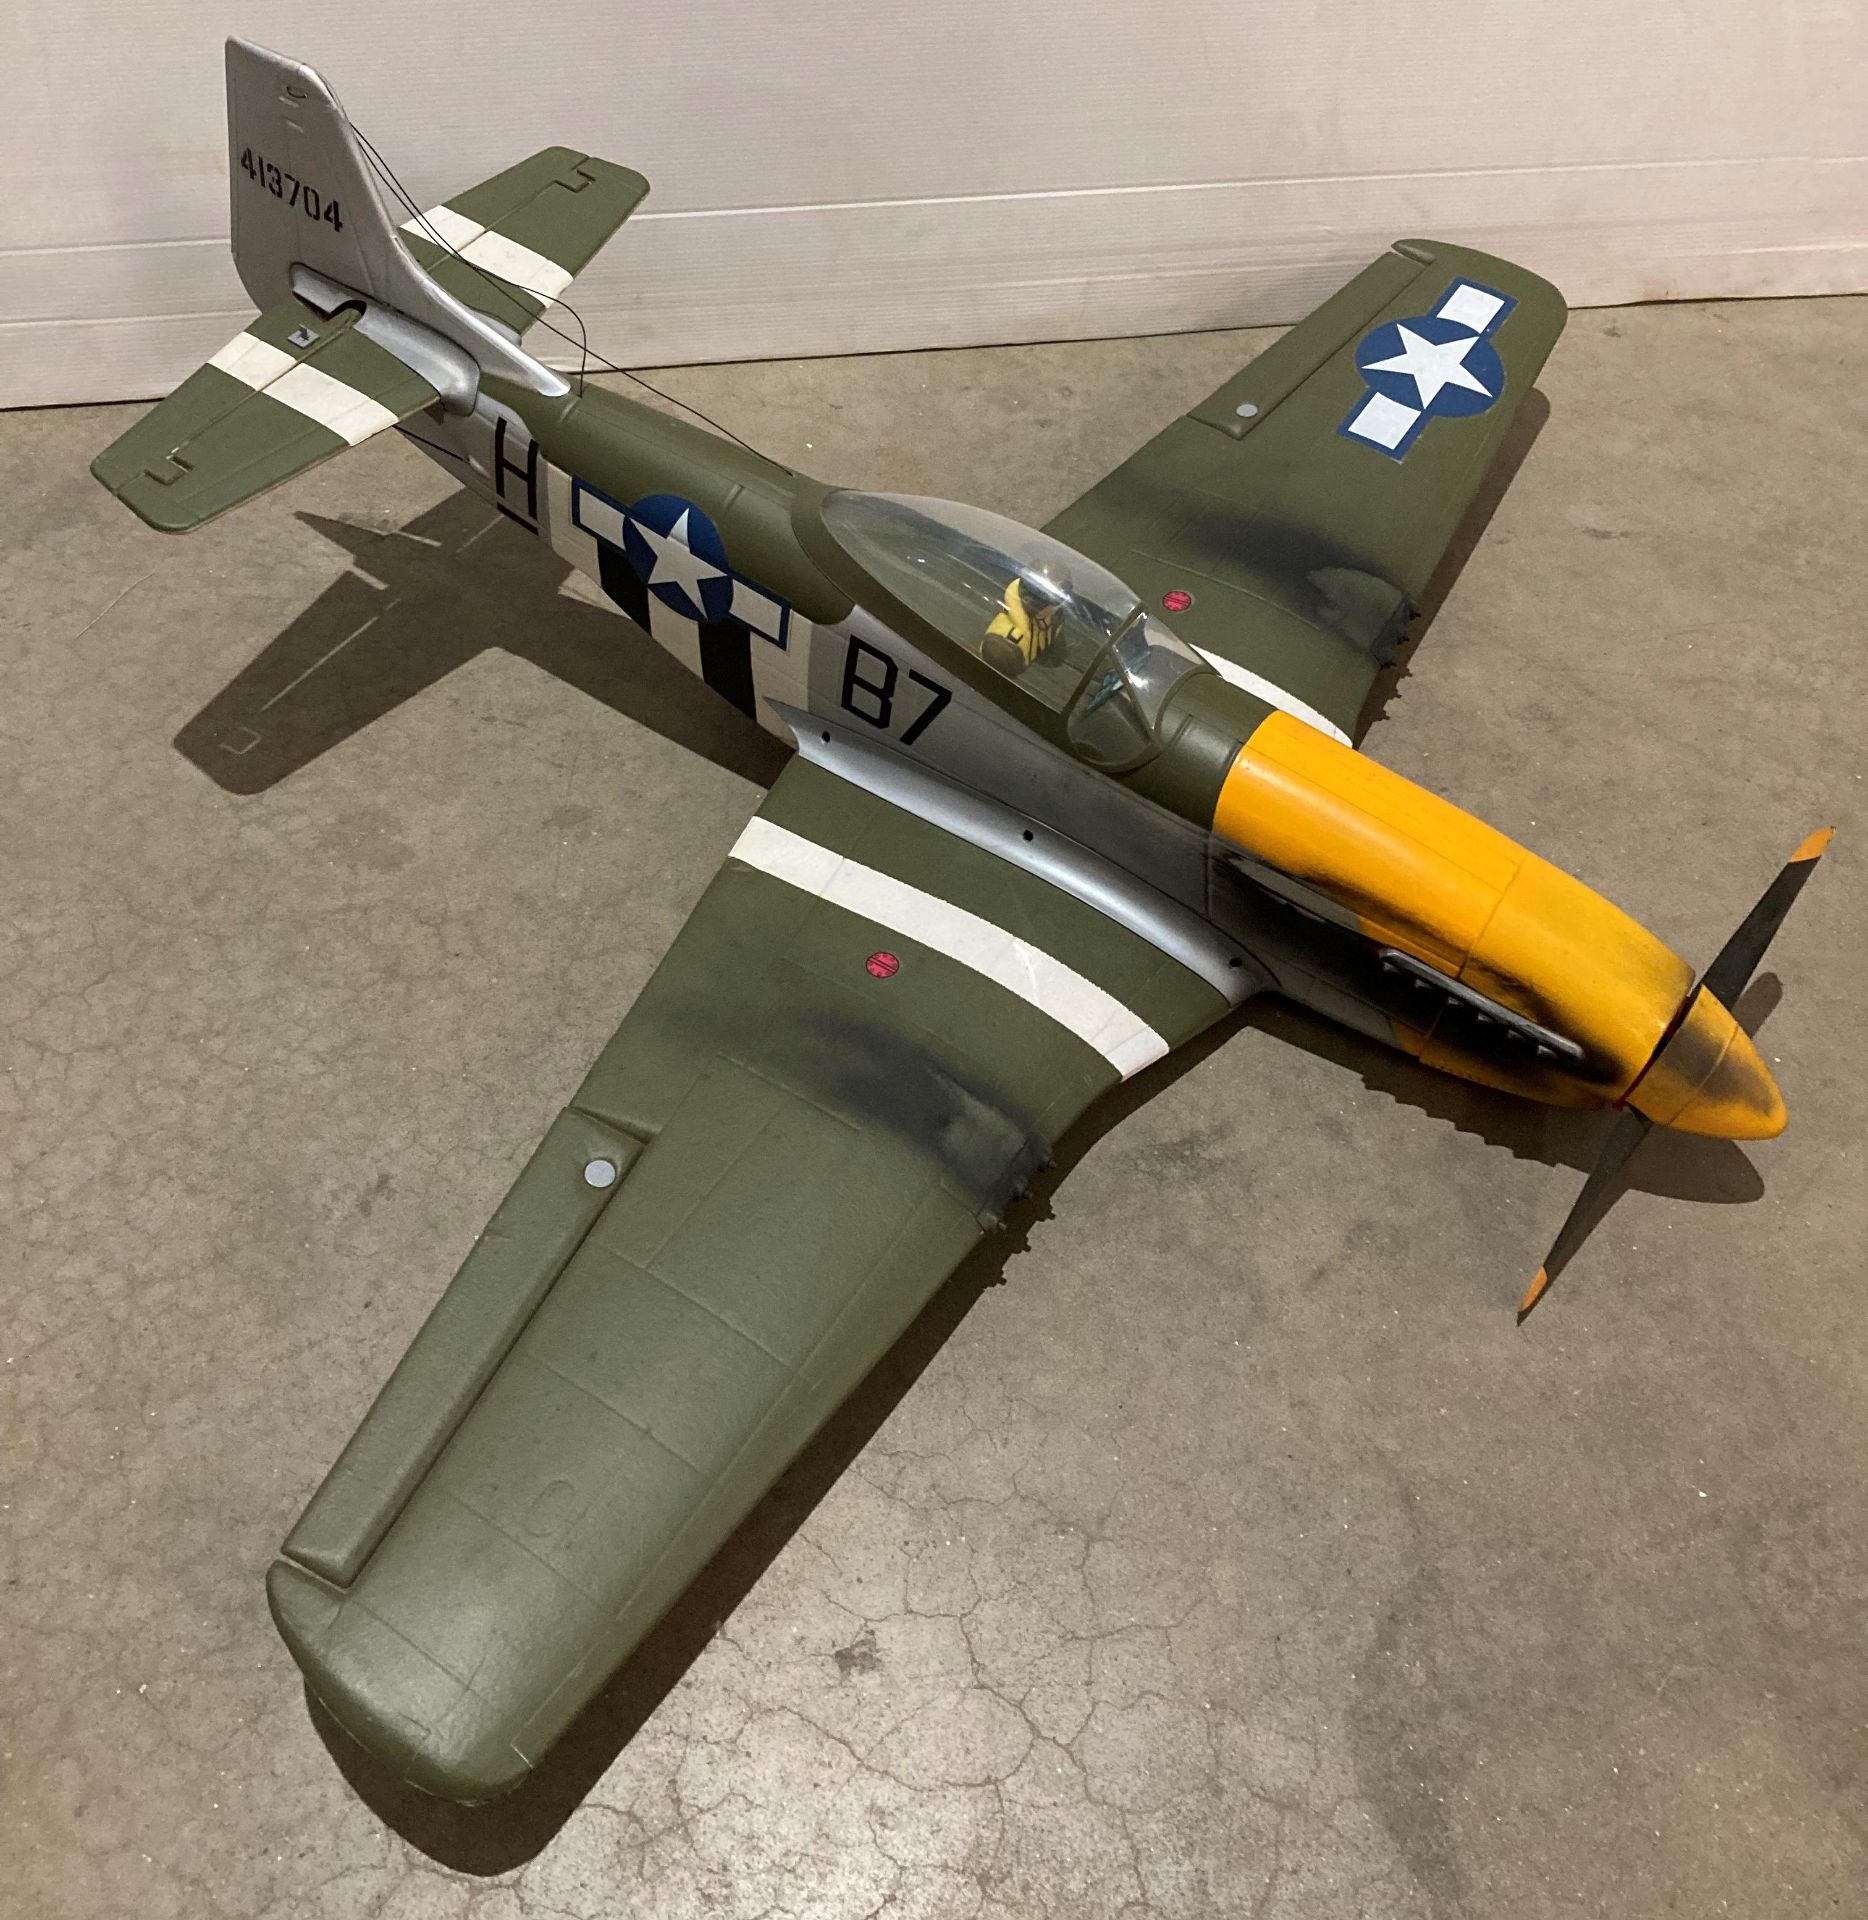 North America P-51 Mustang electric remote controlled model aeroplane (no controller) size 86cm L x - Image 3 of 3